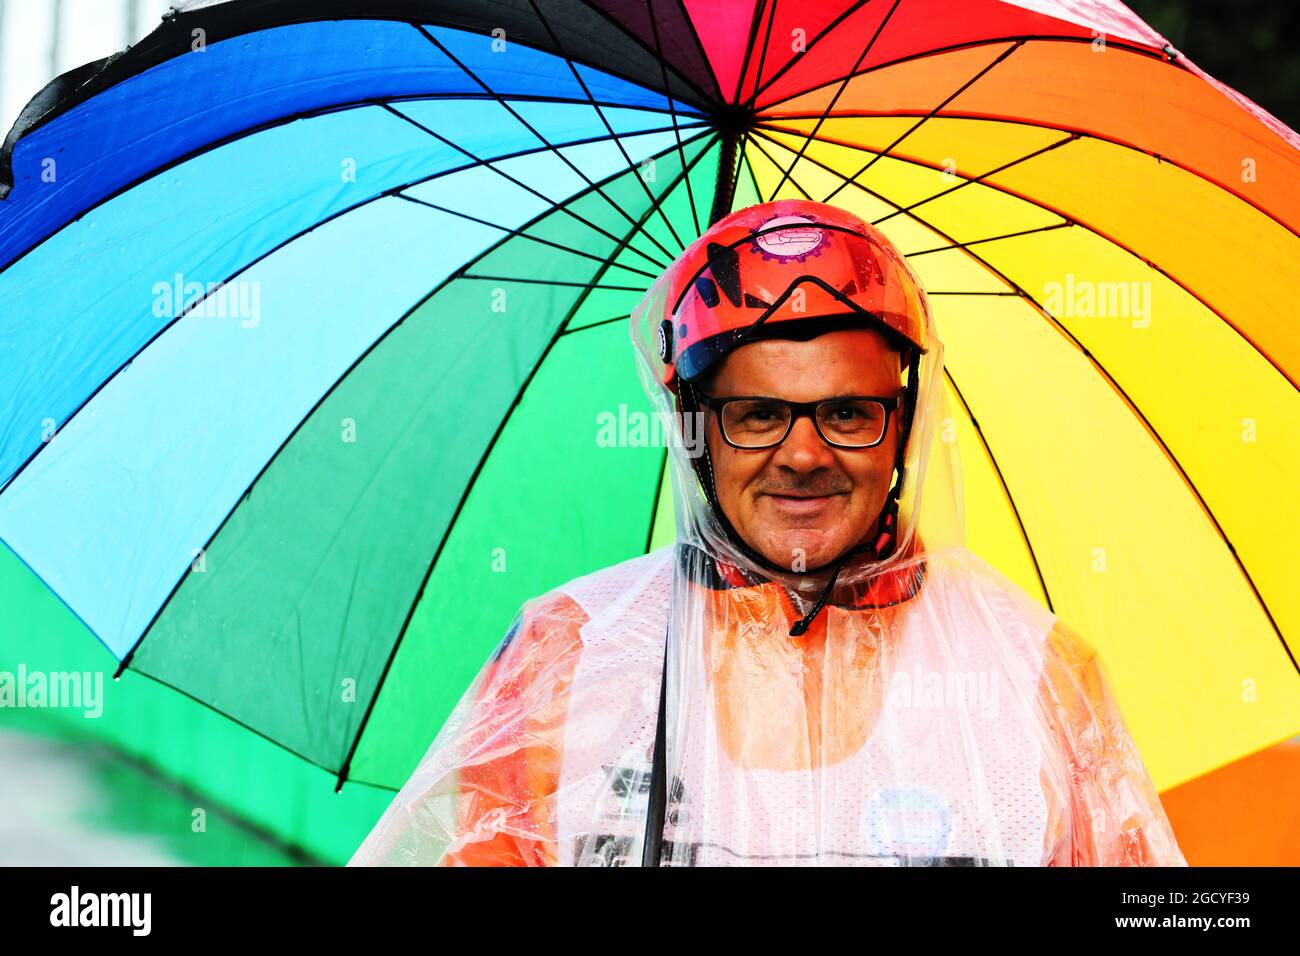 A marshal. Italian Grand Prix, Friday 31st August 2018. Monza Italy. Stock Photo